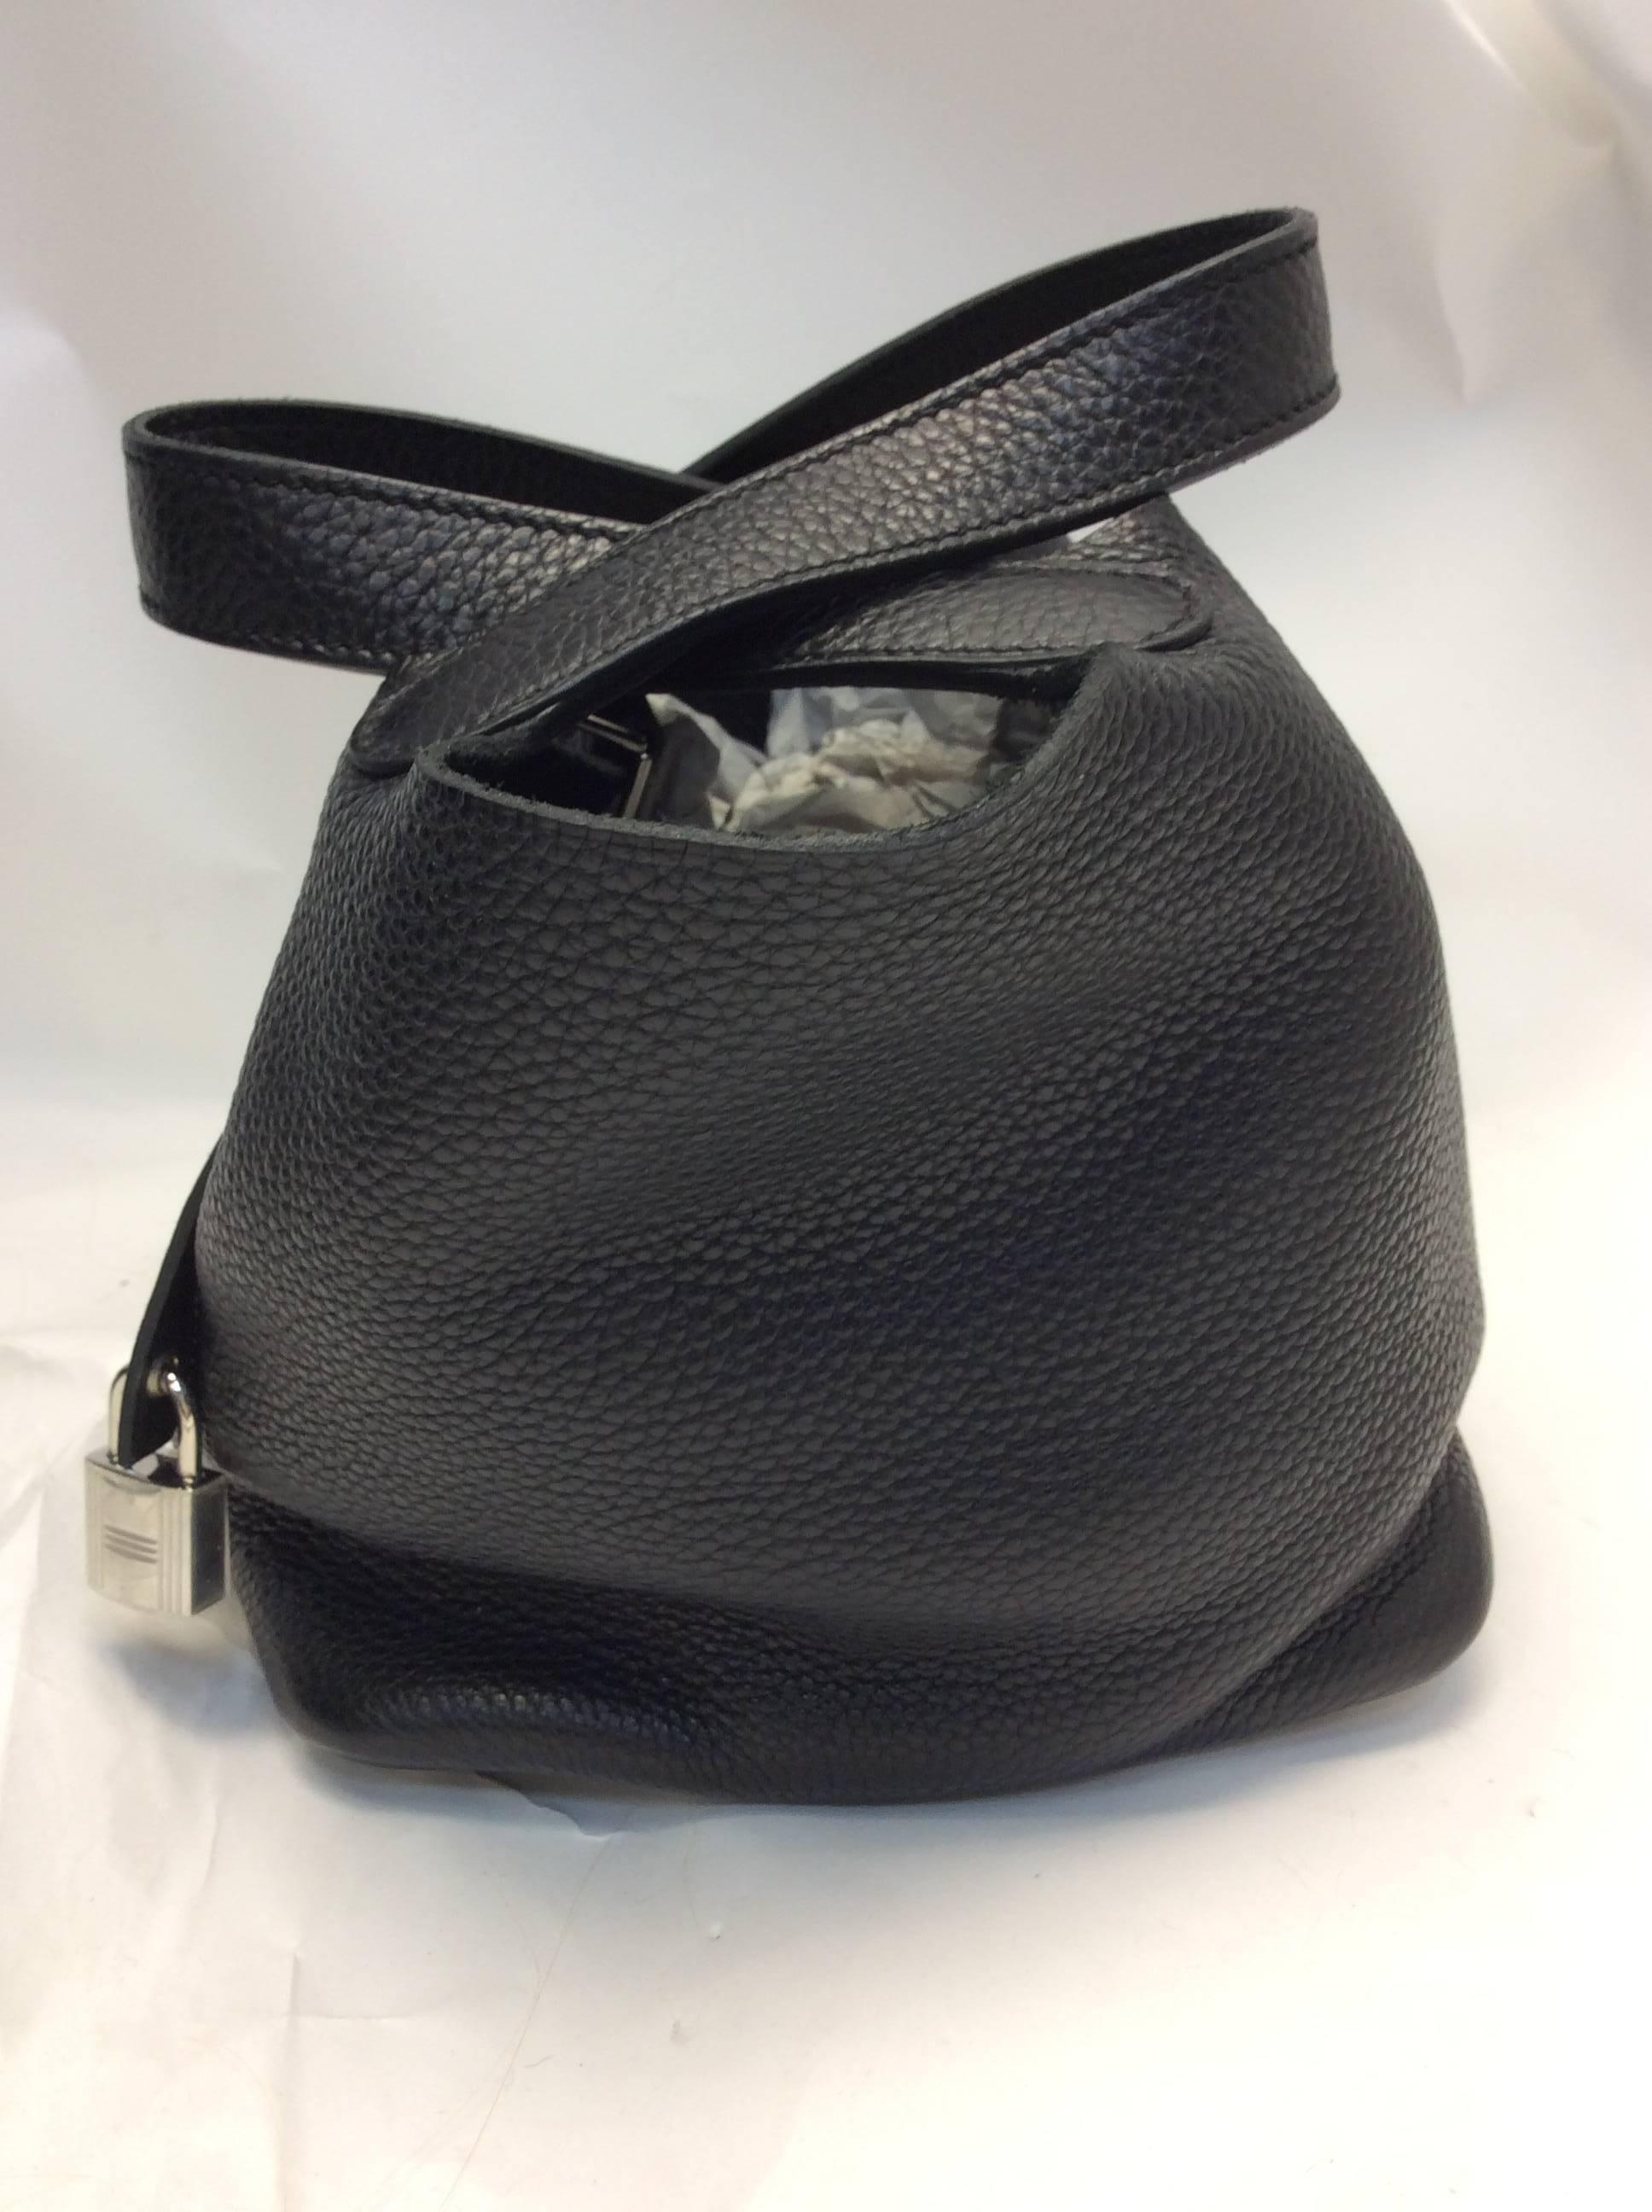 Hermes Picotin Black Leather Small Bag
Silver toned hardware 
$2100
Dog feet on the bottom
Lock and key included
